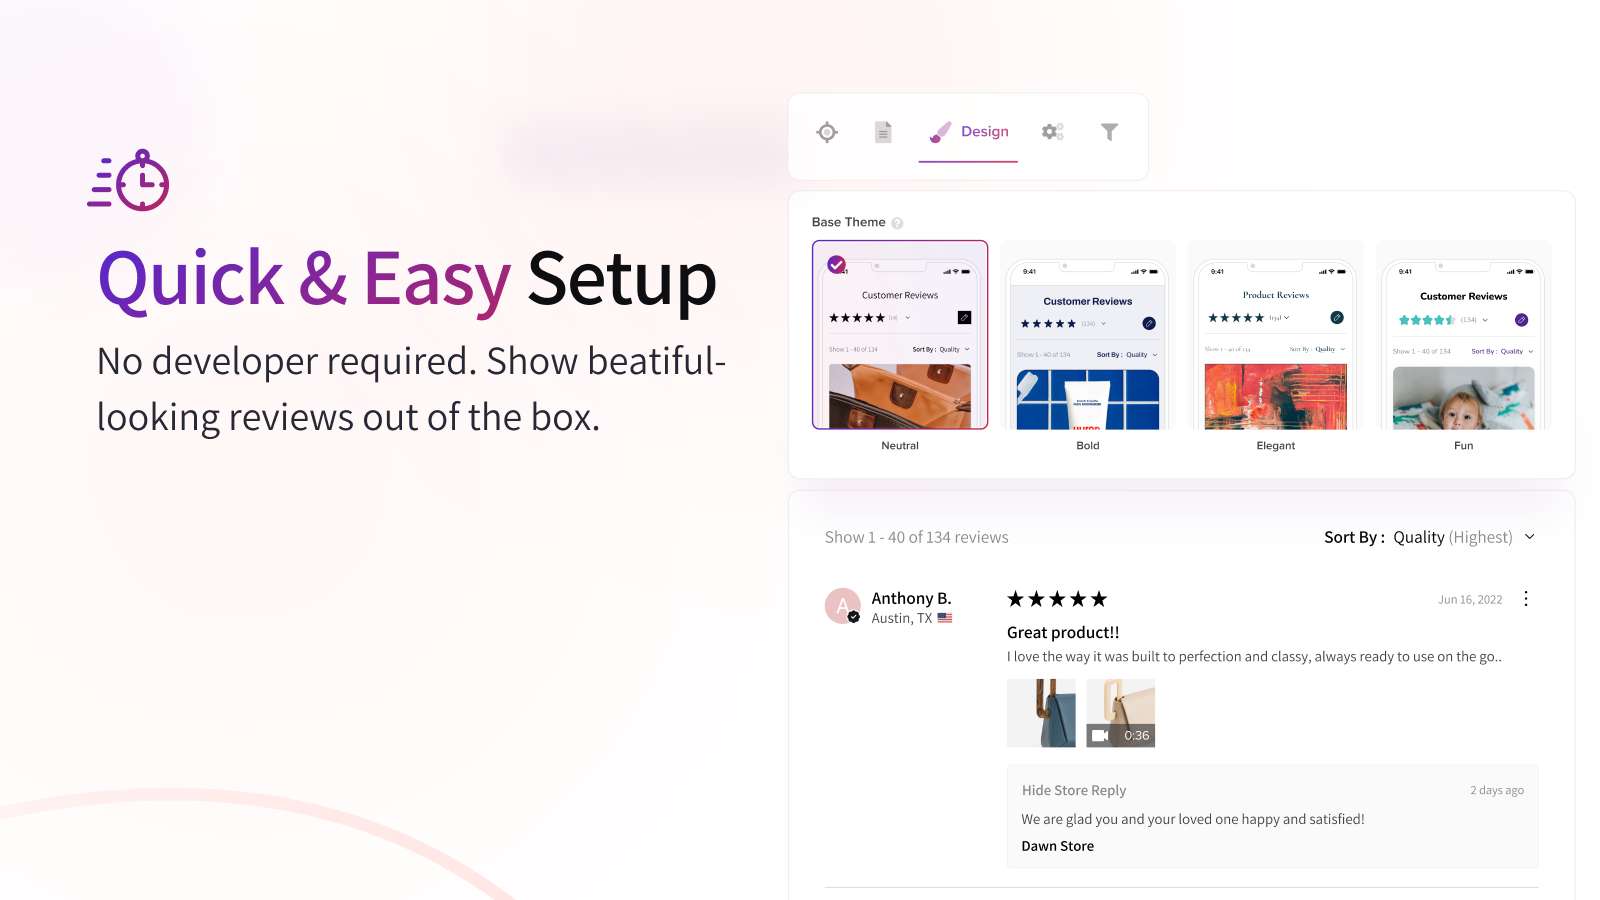 Show beautiful-looking reviews with minimal setup and time spent